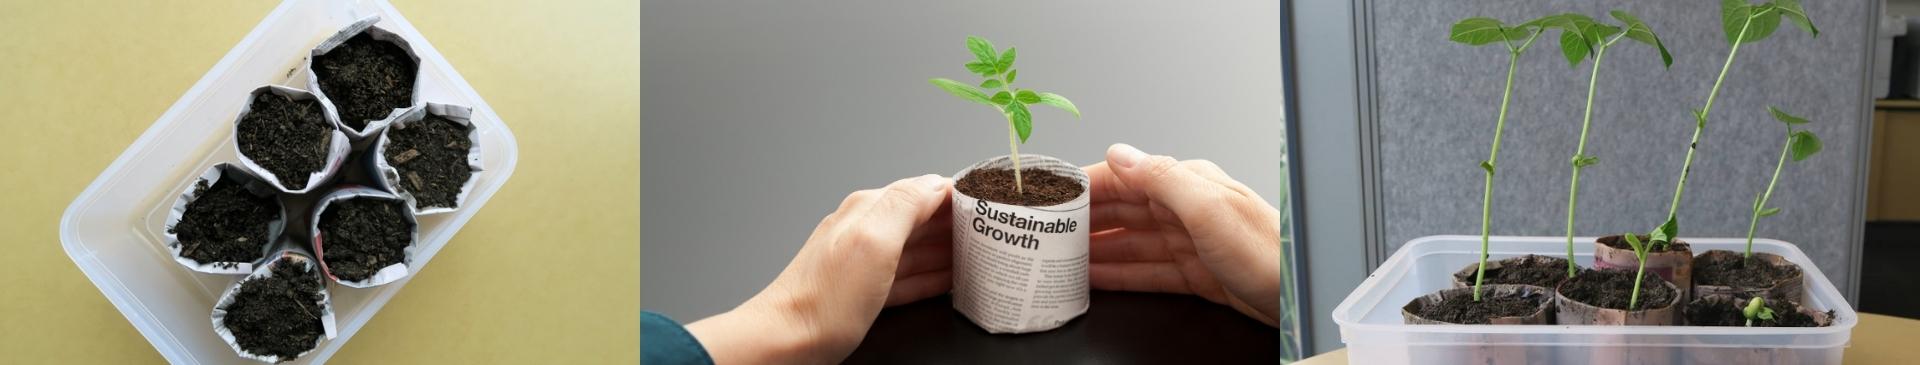 Newspaper Pots - Thrifty, Sustainable Seed Sowing 